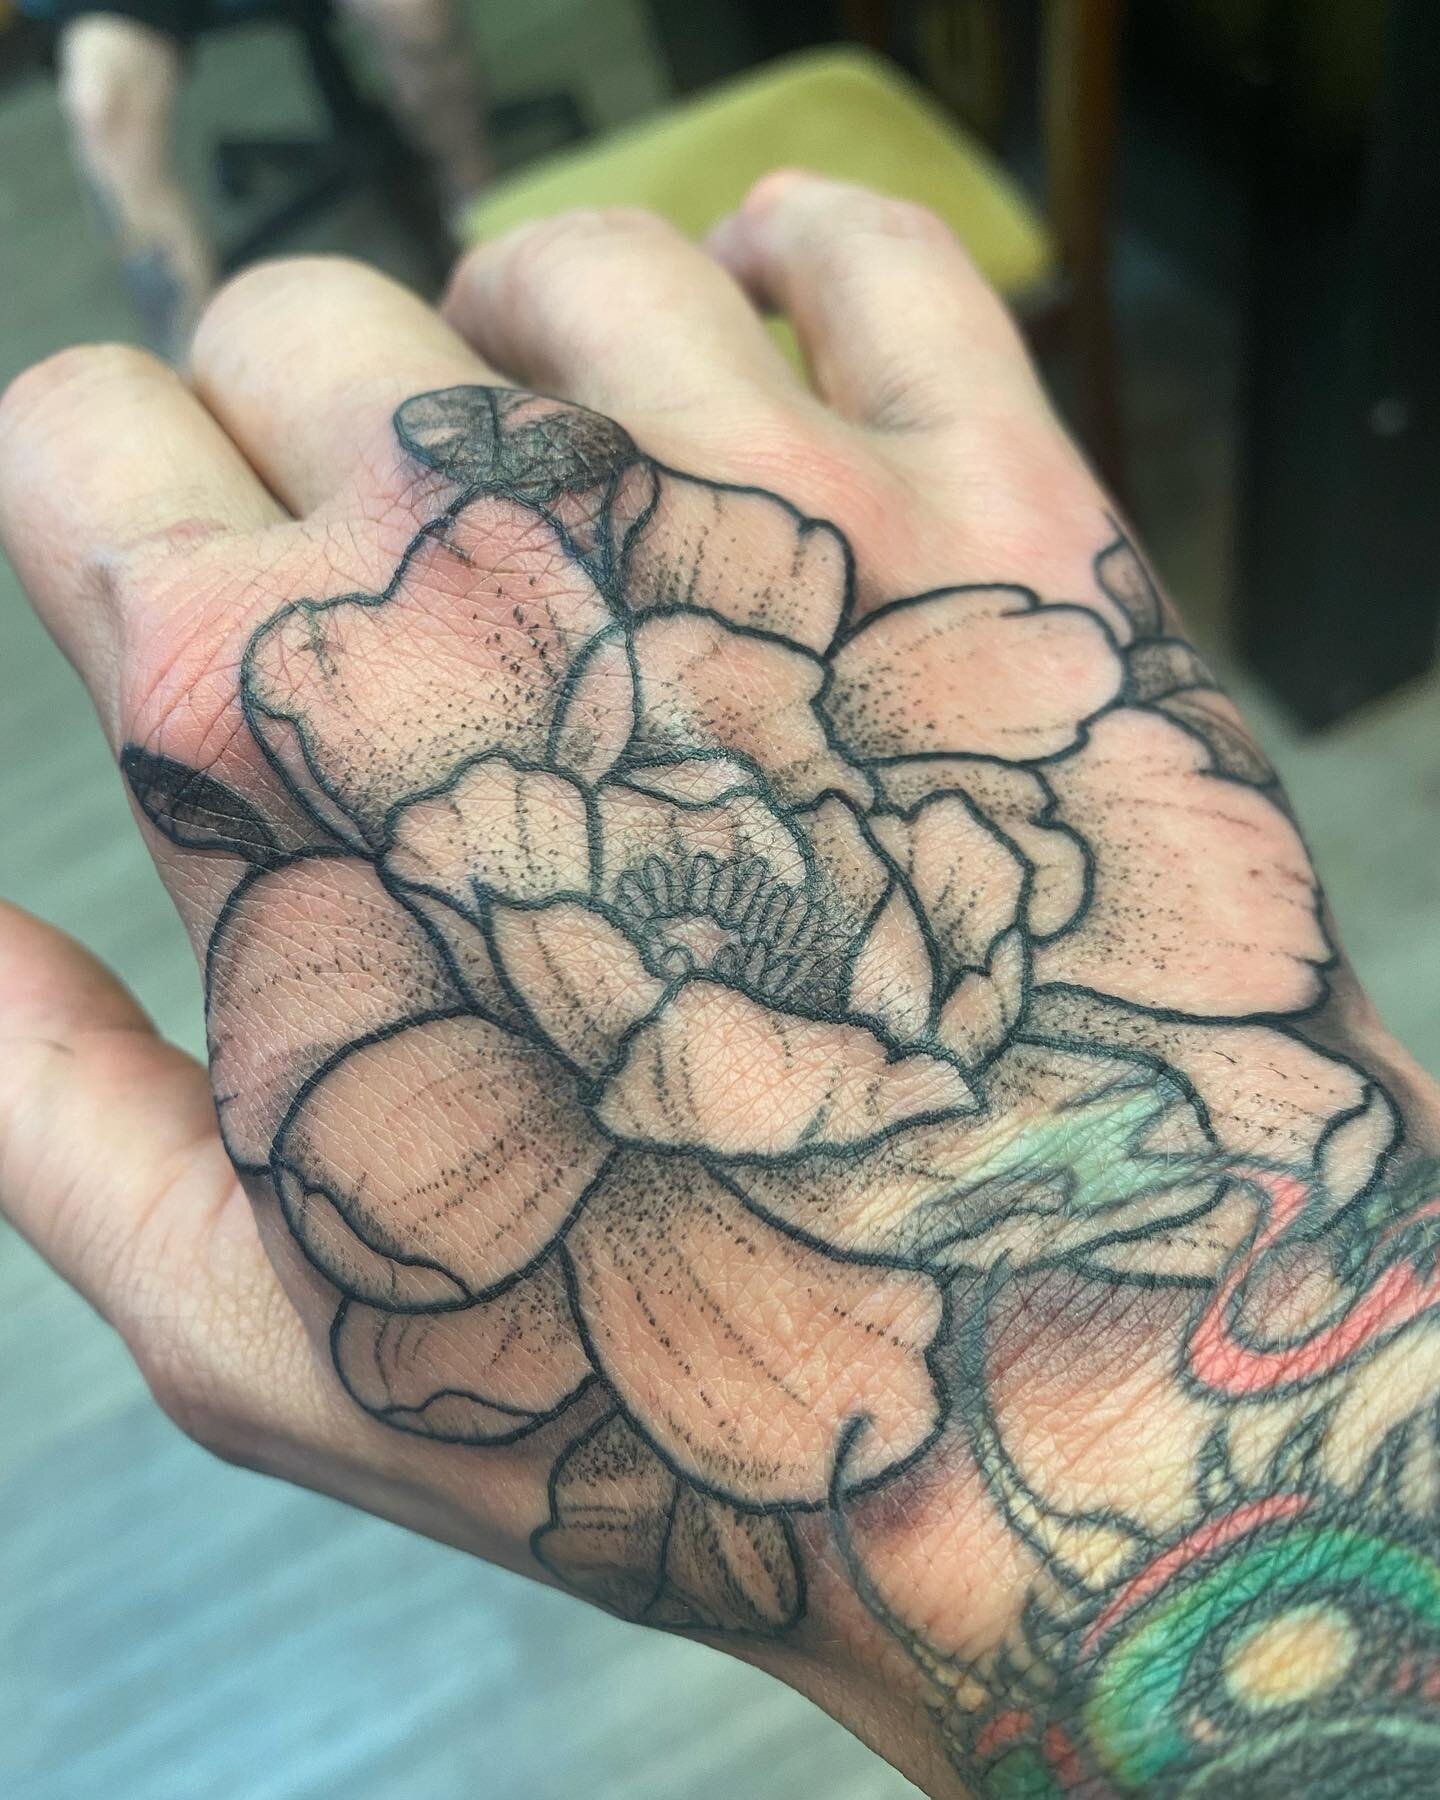 Super clean hand tattoo by @ayla_inks she killed this one on our very own @brookbaileytattoo 🖤